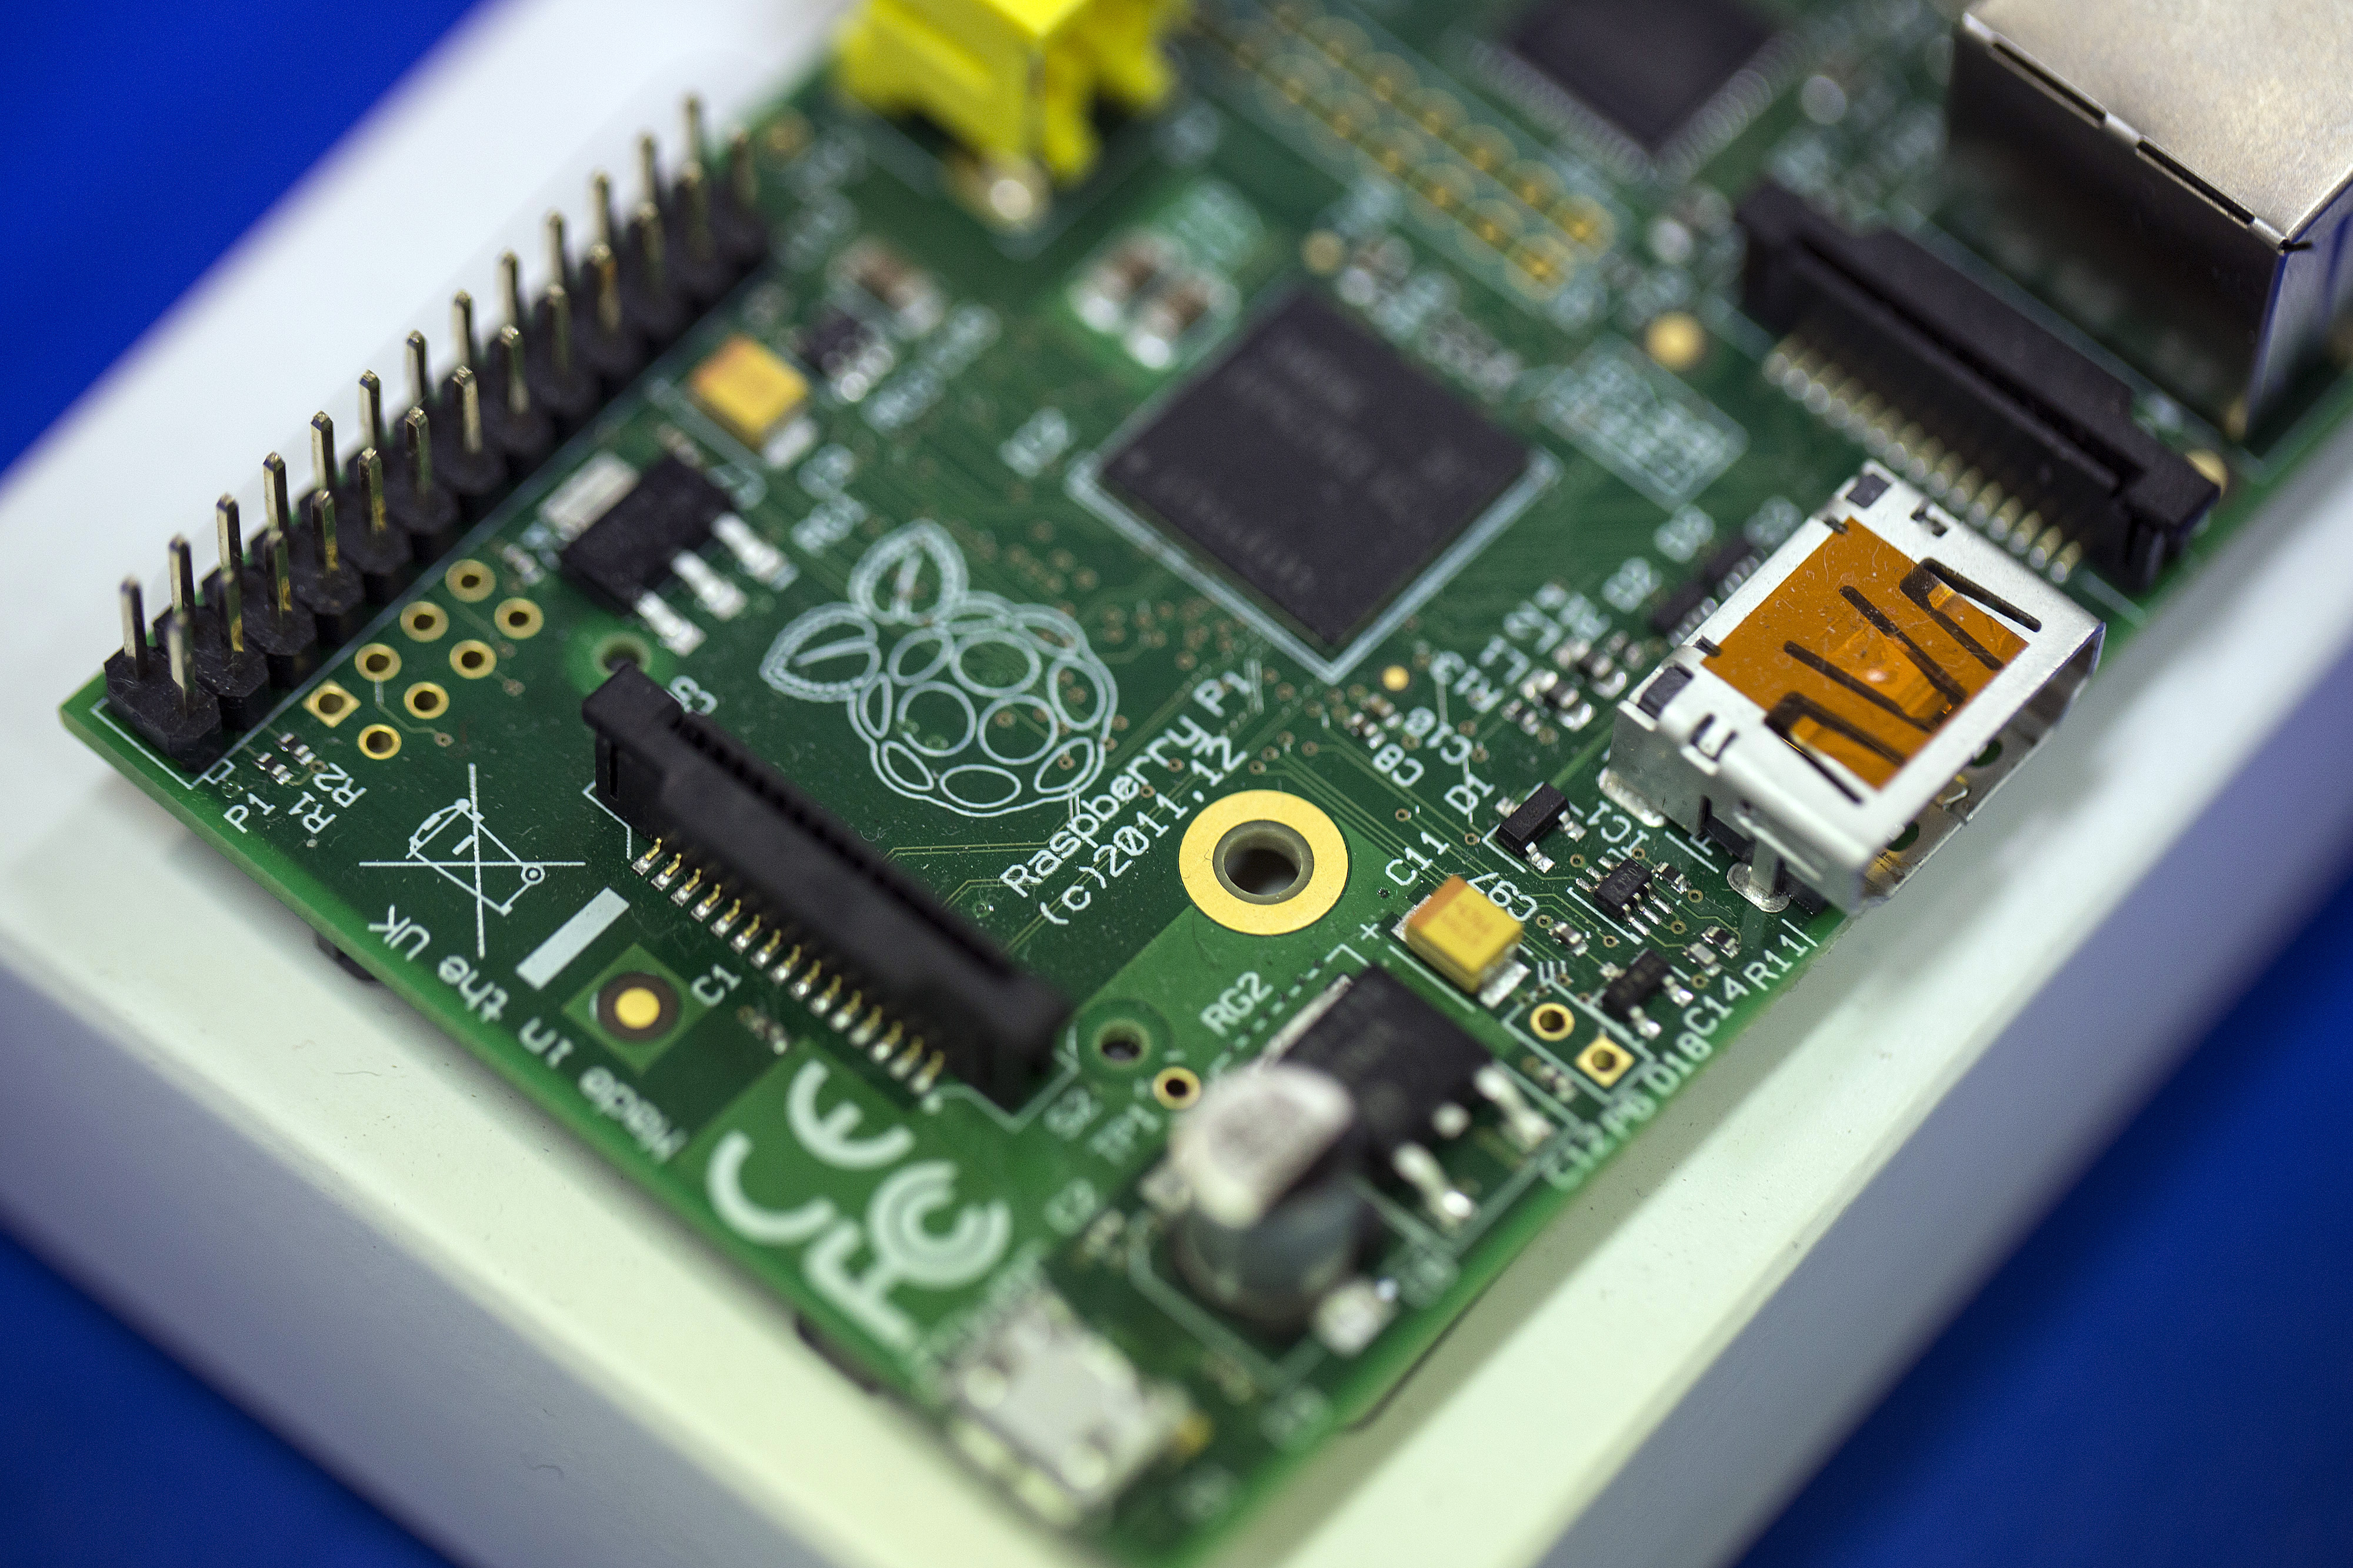 A logo sits on the printed circuit board (PCB) of a Raspberry Pi single-board computer following assembly at Sony Corp.'s technology centre in Pencoed, U.K., on Monday Dec. 16, 2013. (Bloomberg&mdash;Bloomberg via Getty Images)